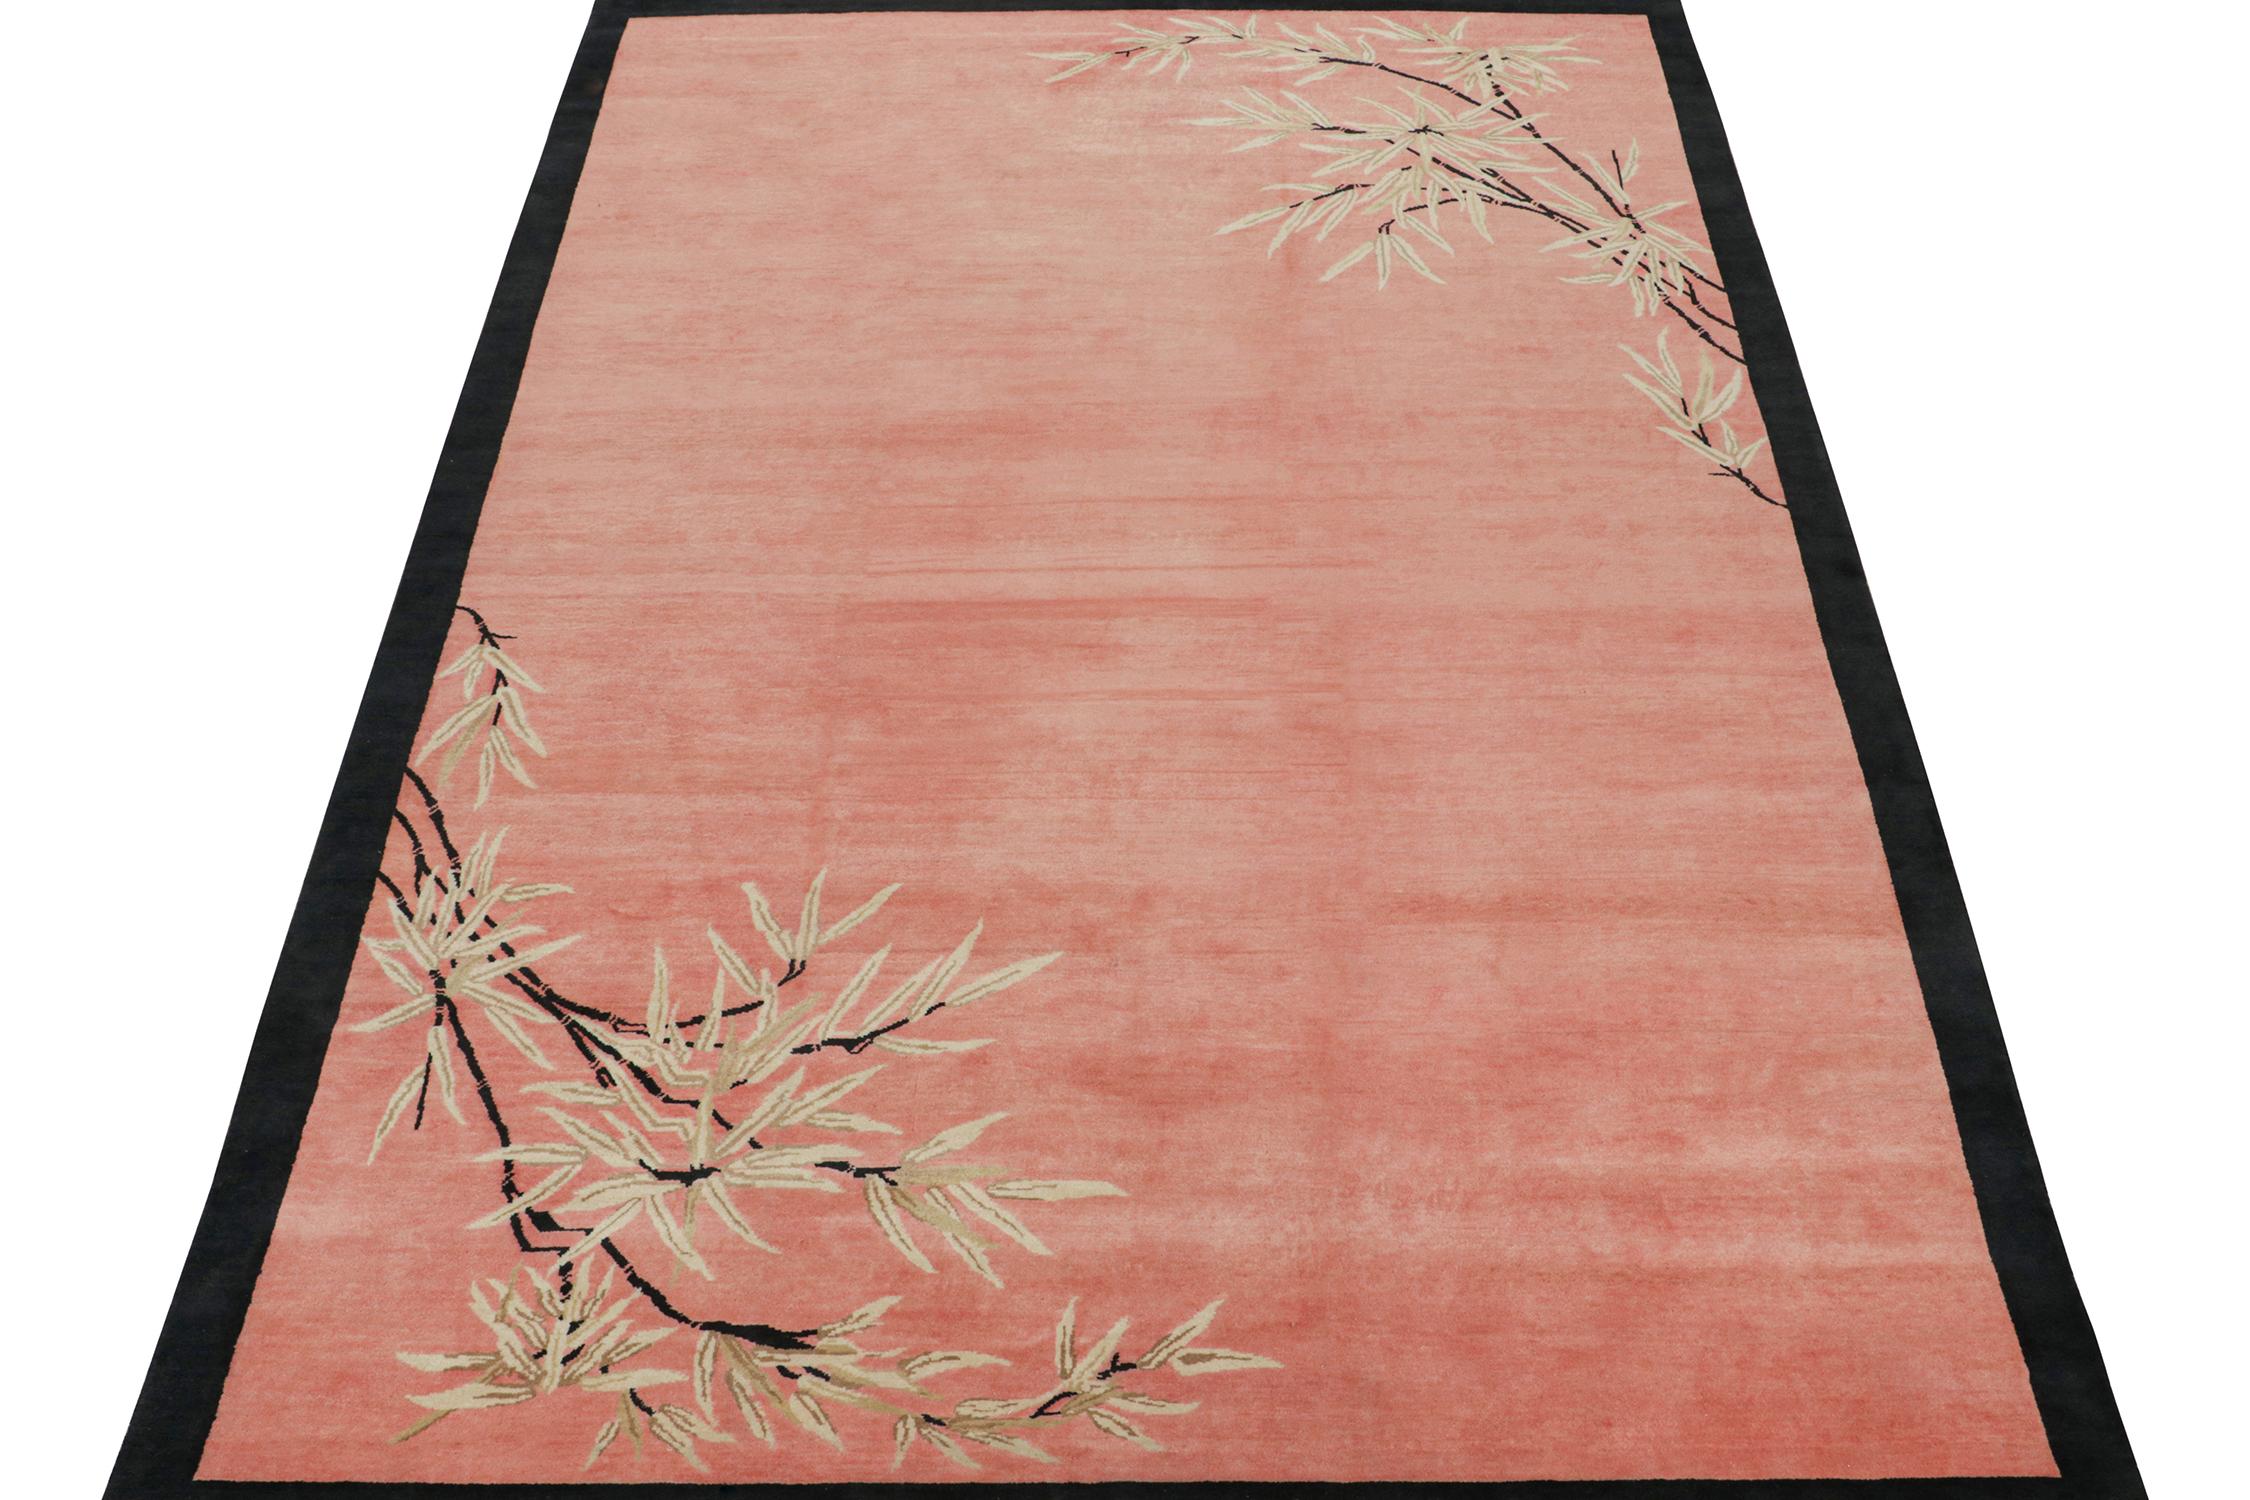 This 9x12 ode to Chinese Art Deco rugs is the next addition to Rug & Kilim's inspired new Deco Collection. 

Further On the Design:

The piece enjoys an emphasis on a warm pink background with finely detailed floral patterns within. Connoisseurs